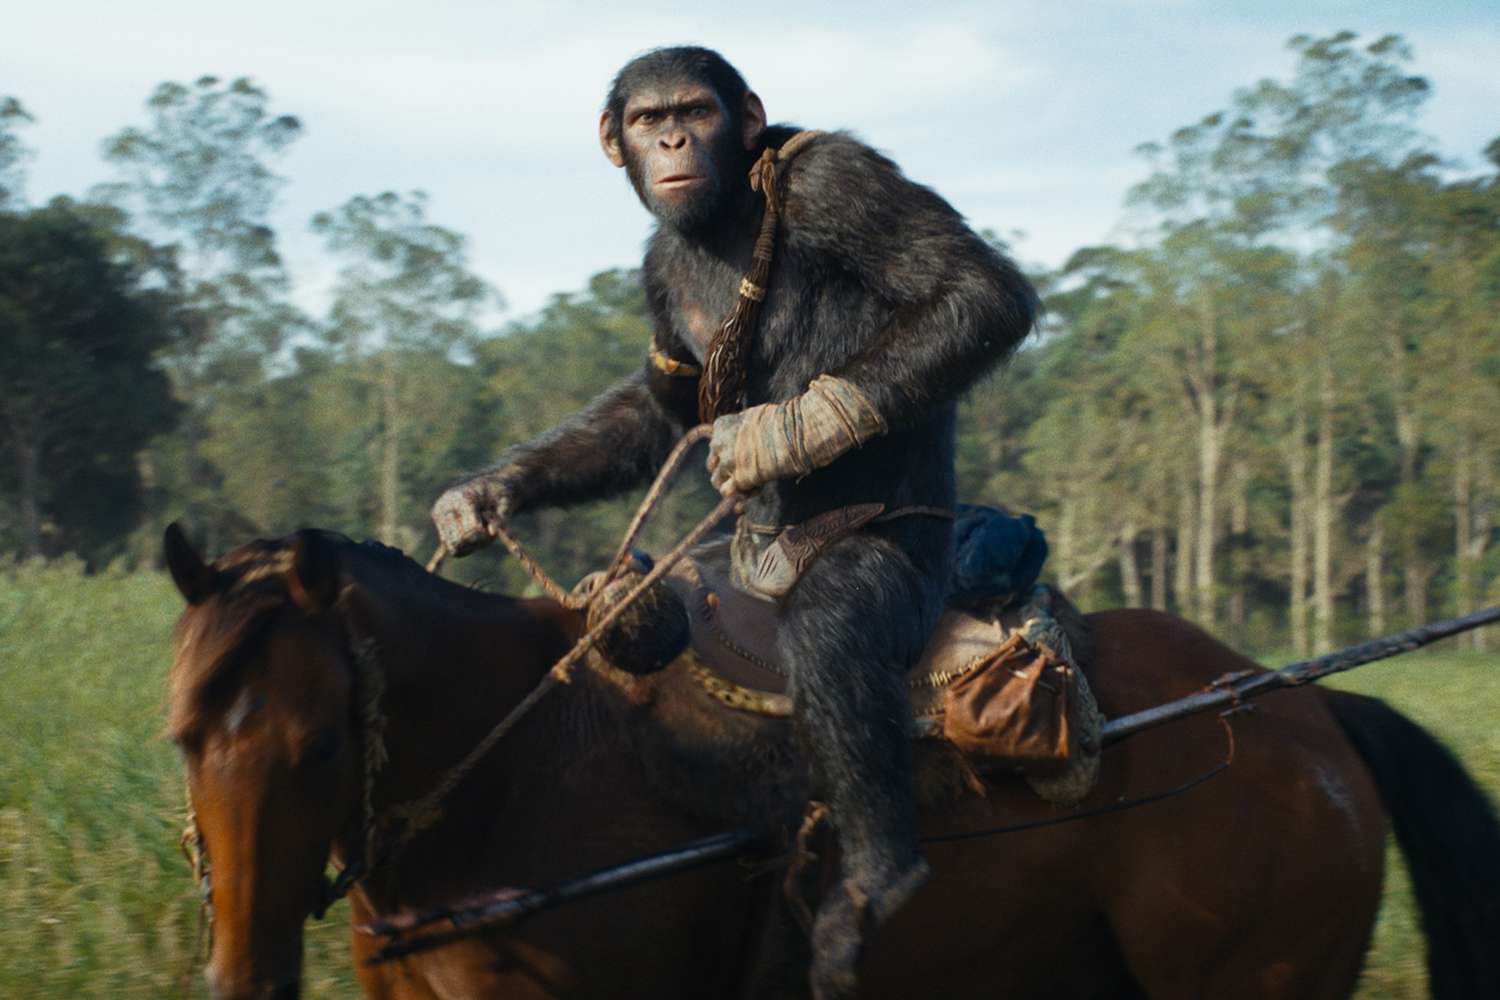 Noa (played by Owen Teague) in 20th Century Studios' KINGDOM OF THE PLANET OF THE APES.